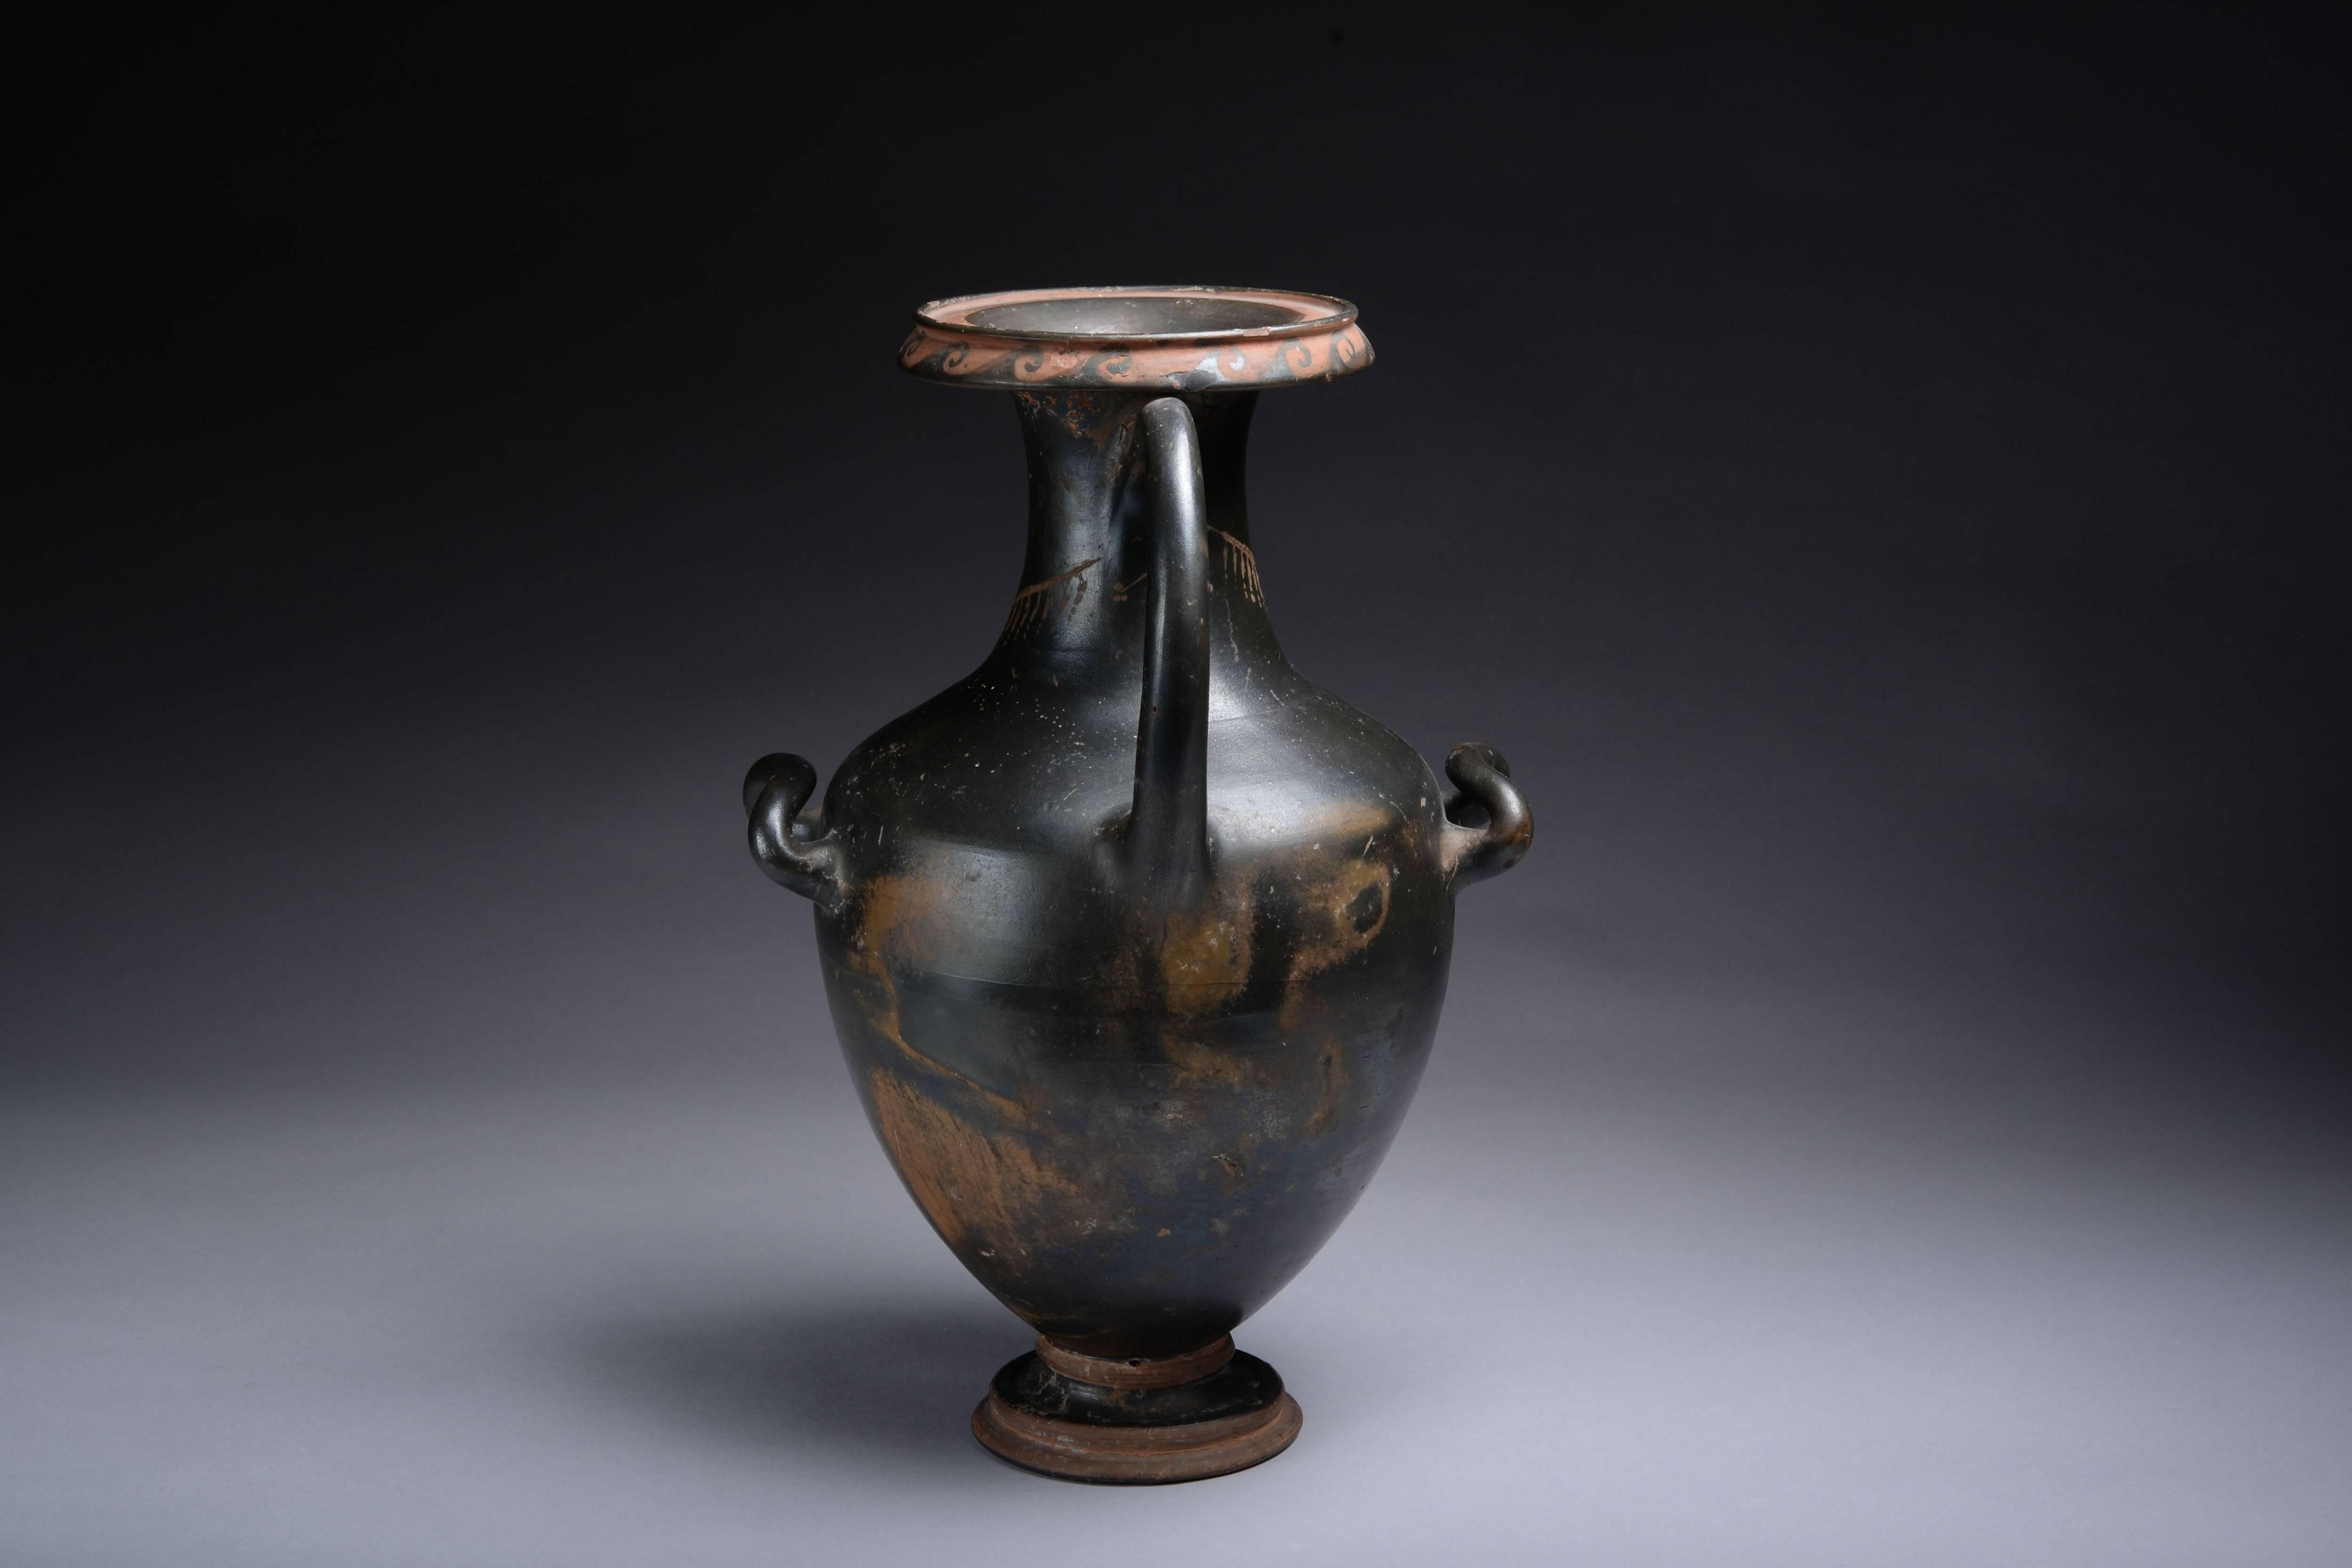 A well provenanced, large, elegant ancient Greek blackware hydria, dating to the 4th century BC.
 
The piece stands on a circular base, rising into an acorn shaped body, cylindrical neck and splayed mouth, a large loop handle arching from the neck